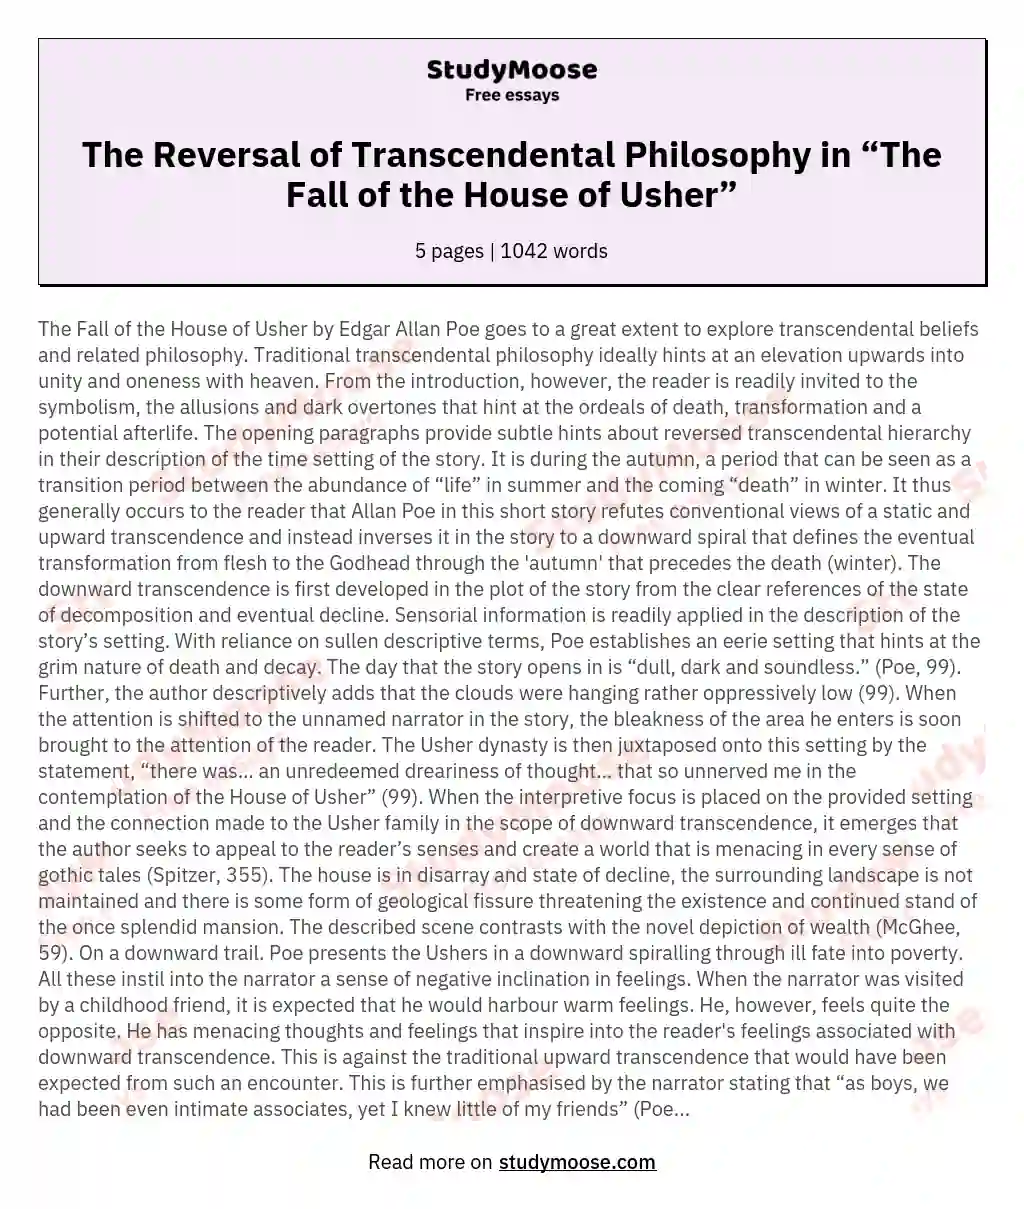 The Reversal of Transcendental Philosophy in “The Fall of the House of Usher” essay